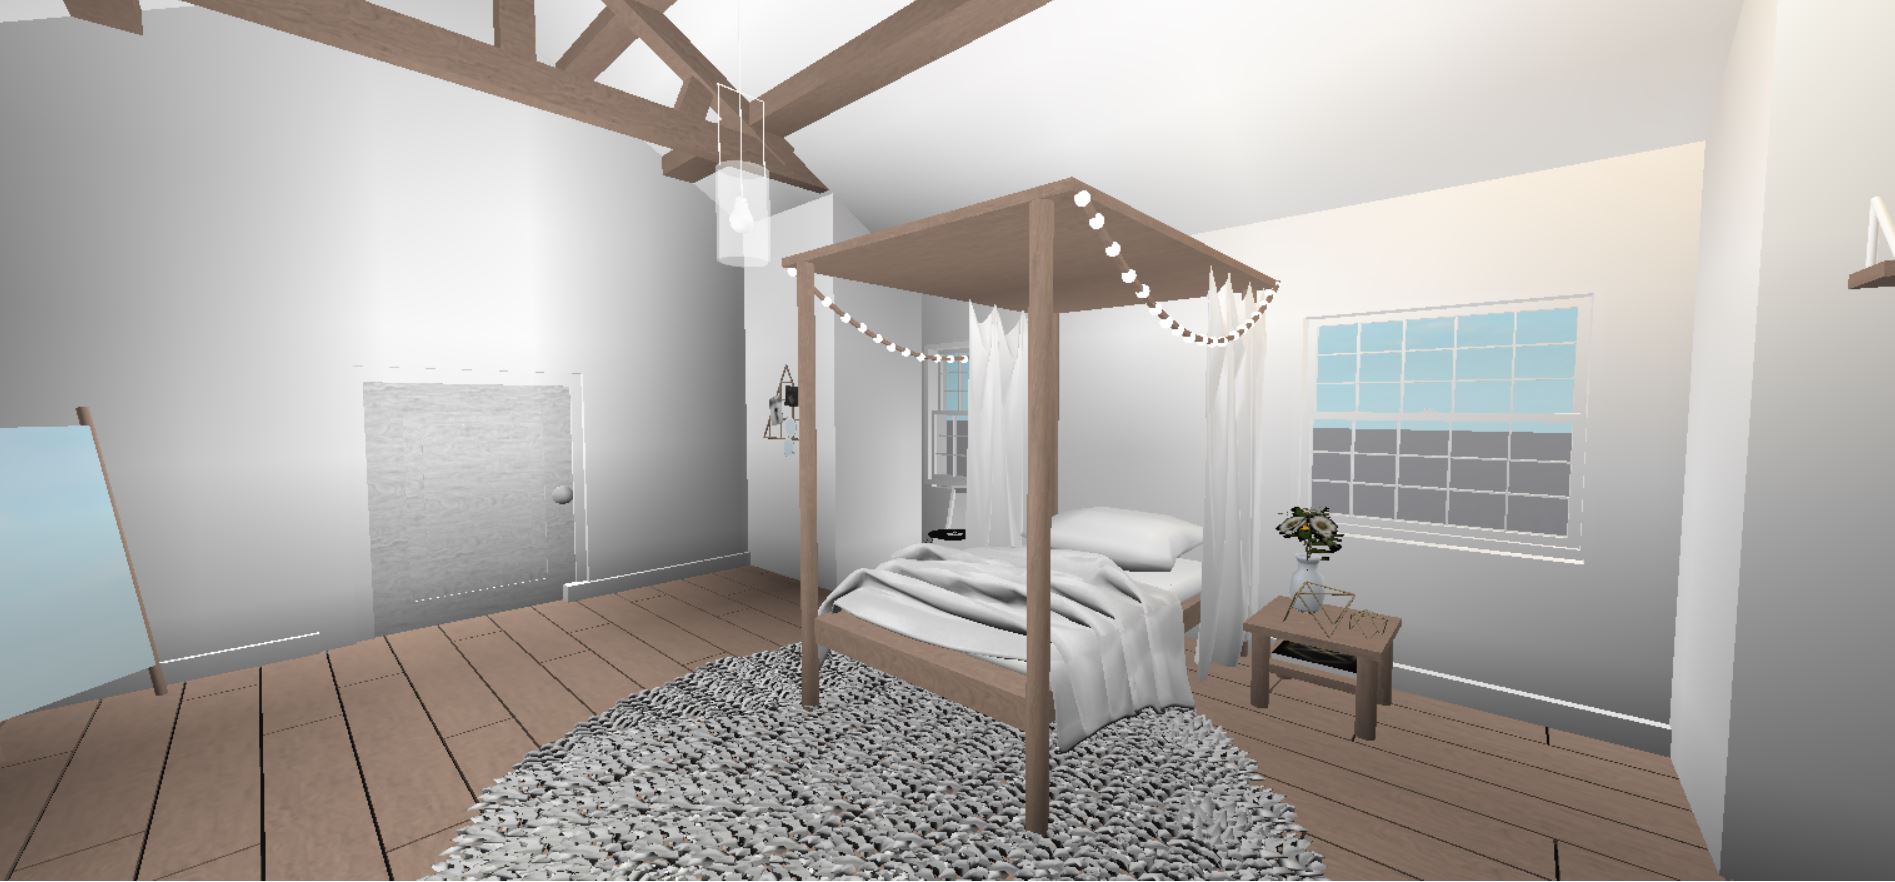 Ayzria On Twitter Neutral Bedroom Made In Roblox Studio - how to make a roblox bedroom